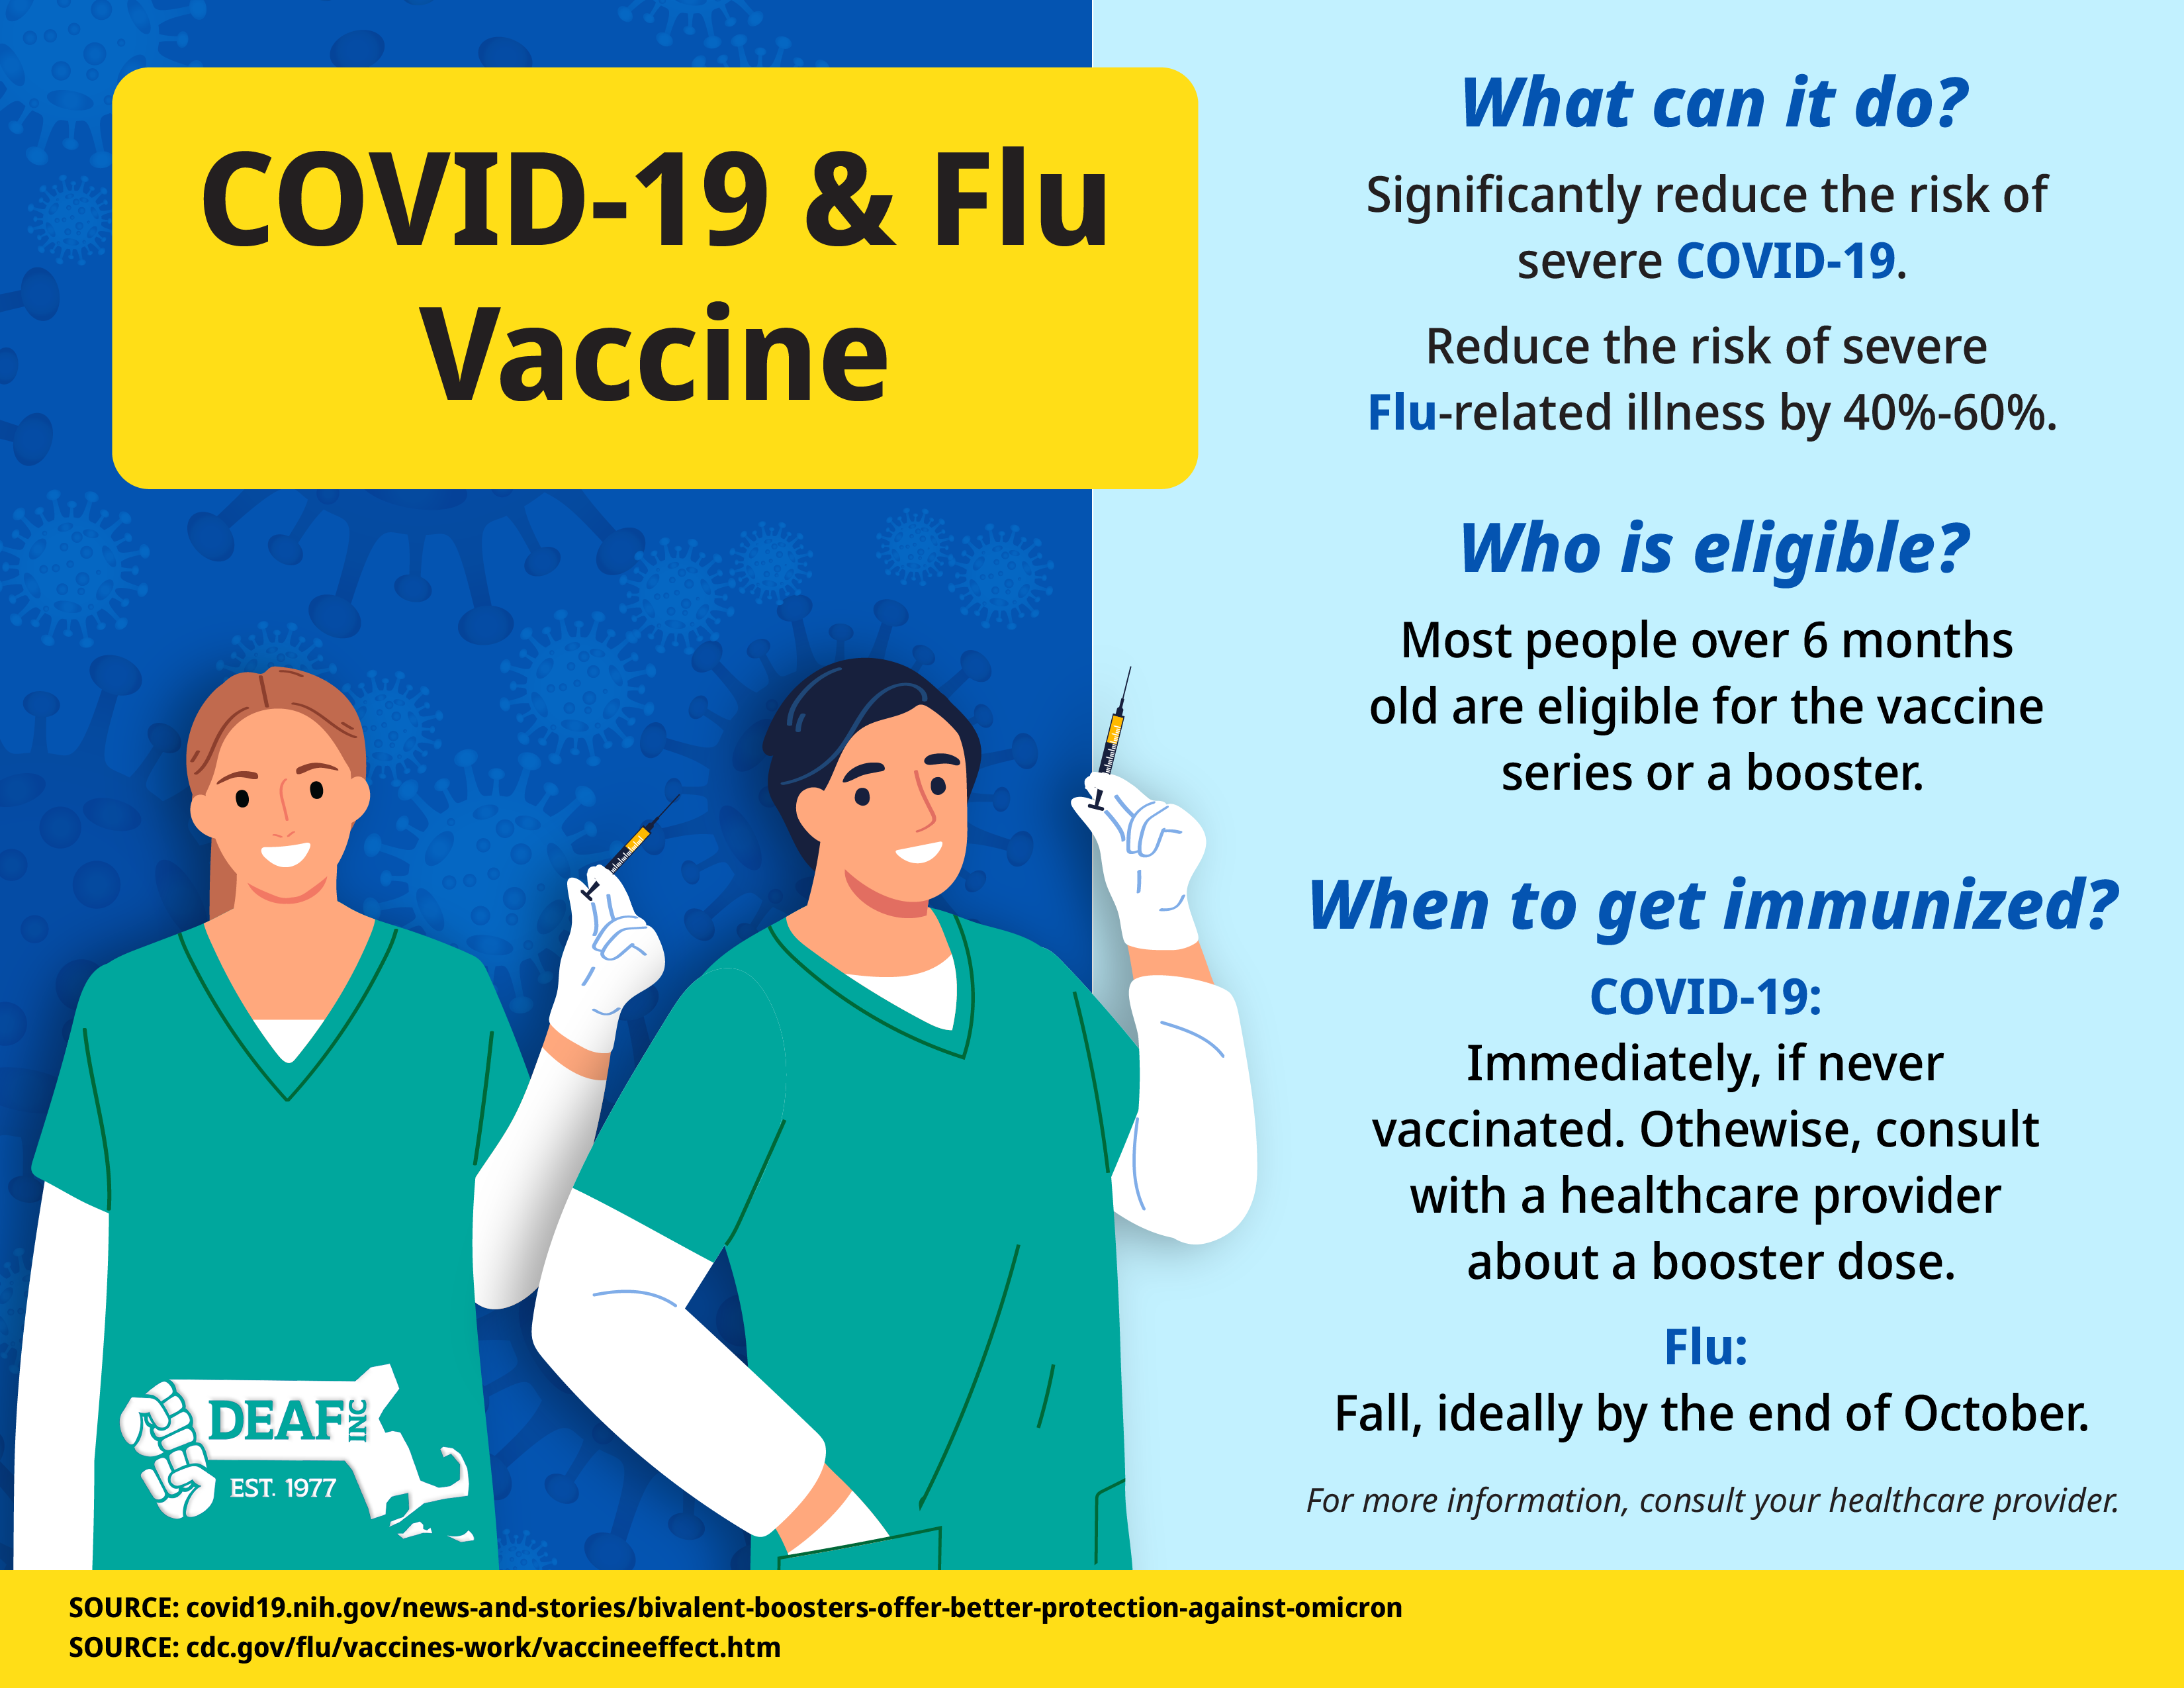 A flyer with a split dark blue and light blue background titled, “COVID-19 & Flu Vaccine” in the dark blue section. There is also an image of two medical professionals in scrubs holding needles, behind a DEAF, Inc. logo. The light blue section reads, “What can it do? Significantly reduce the risk of severe COVID-19. Reduce the risk of severe Flu-related illness by 40%-60%. Who is eligible? Most people over 6 months old are eligible for the vaccine series or a booster. When to get immunized? COVID-19: Immediately, if never vaccinated. Othewise, consult with a healthcare provider about a booster dose. Flu: Fall, ideally by the end of October. For more information, consult your healthcare provider.” A yellow strip at the bottom of the flyer shows the source information, “SOURCE: covid19.nih.gov/news-and-stories/bivalent-boosters-offer-better-protection-against-omicron SOURCE: cdc.gov/flu/vaccines-work/vaccineeffect.htm “